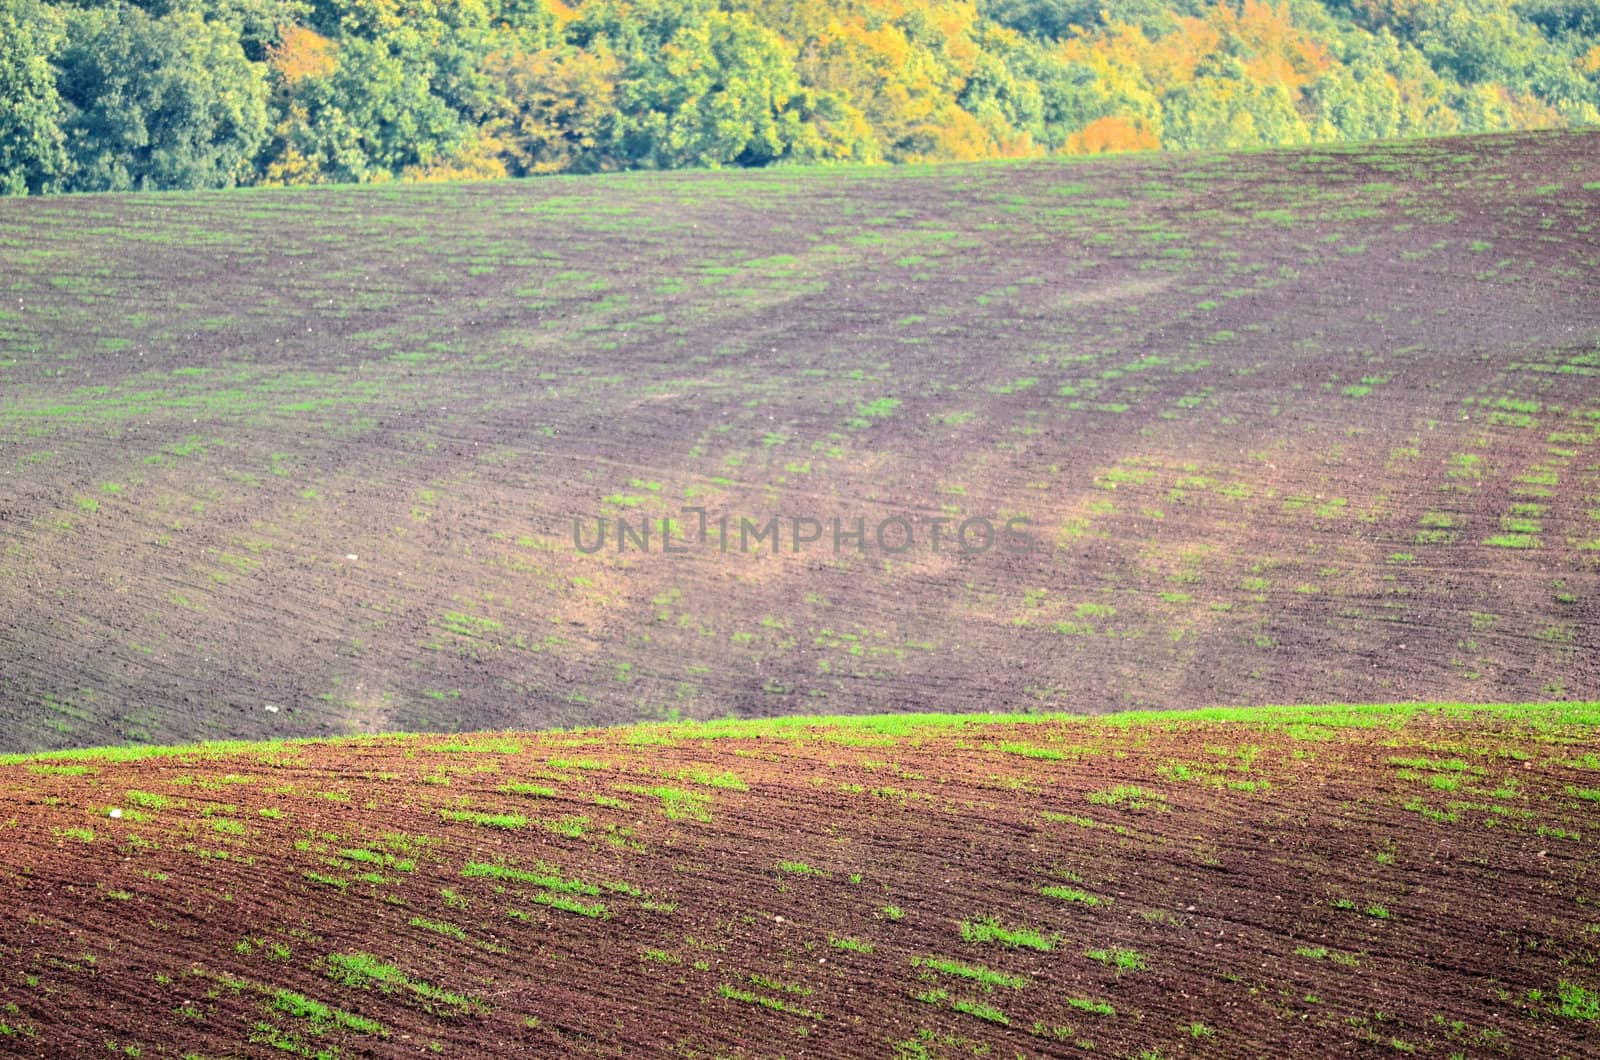 preparation of the fields in autumn